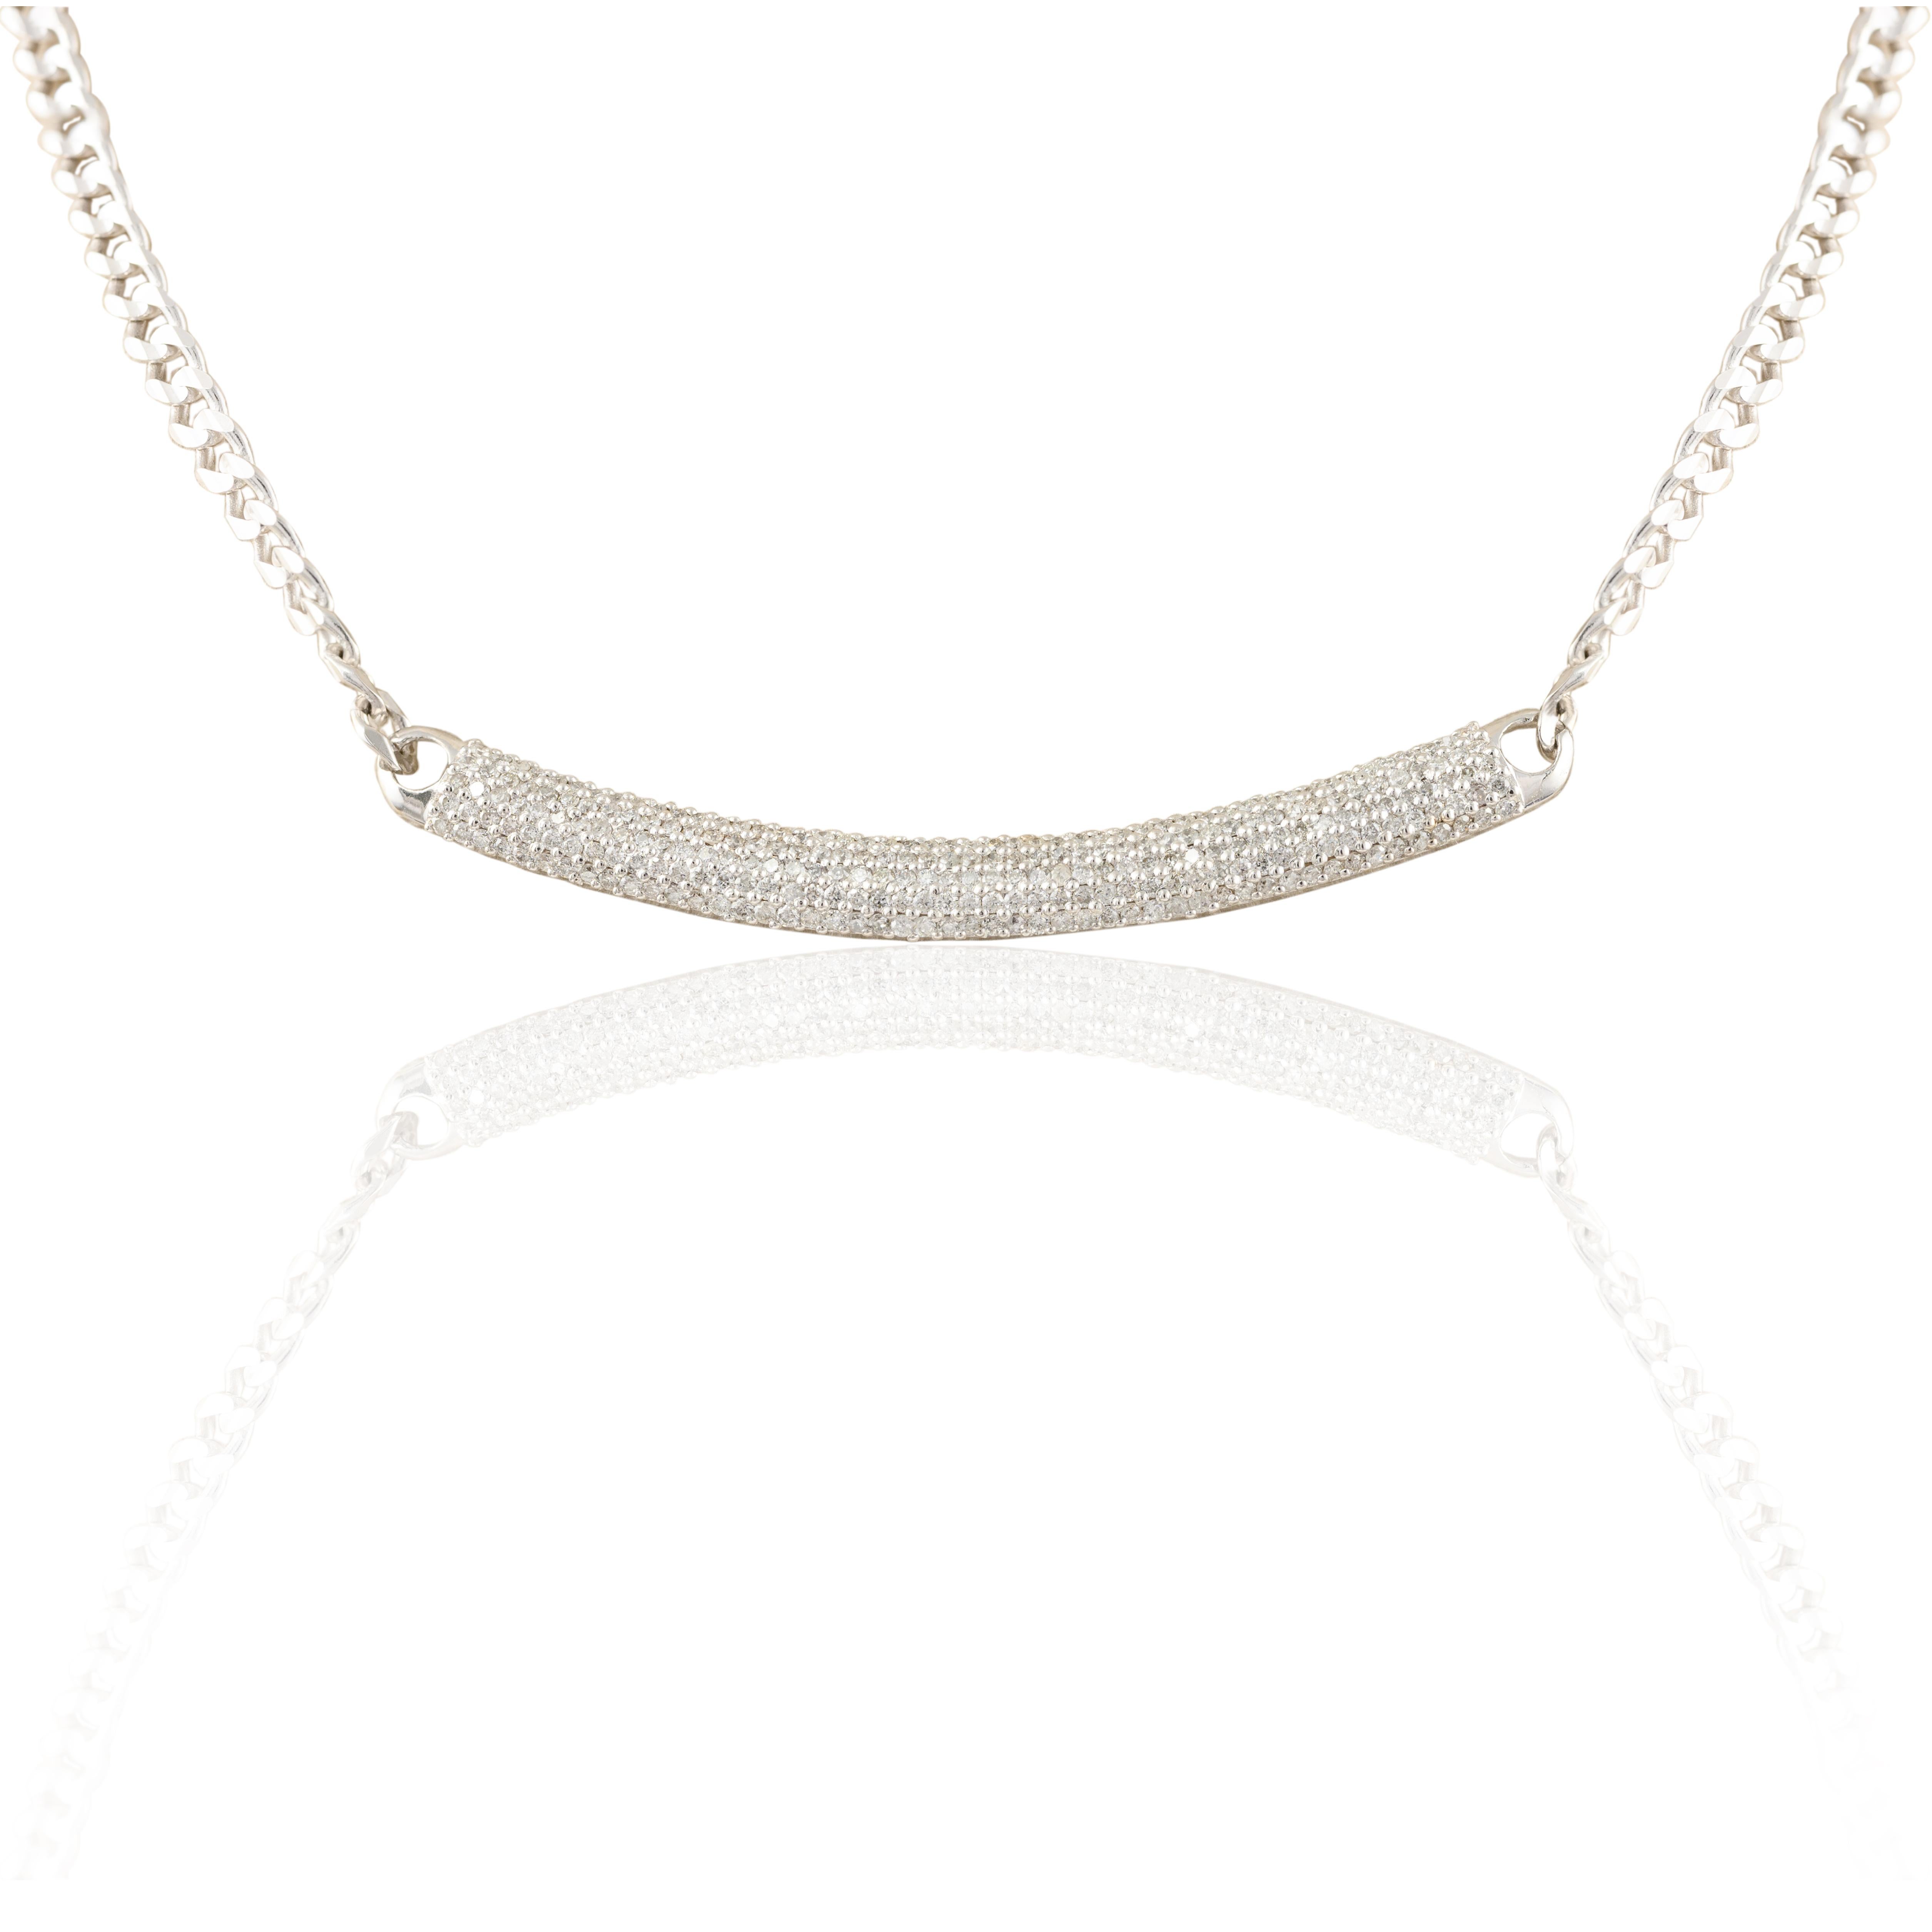 Modernist 14k Solid White Gold Diamond Chain Necklace, Fine Jewelry Gift For Daughter For Sale